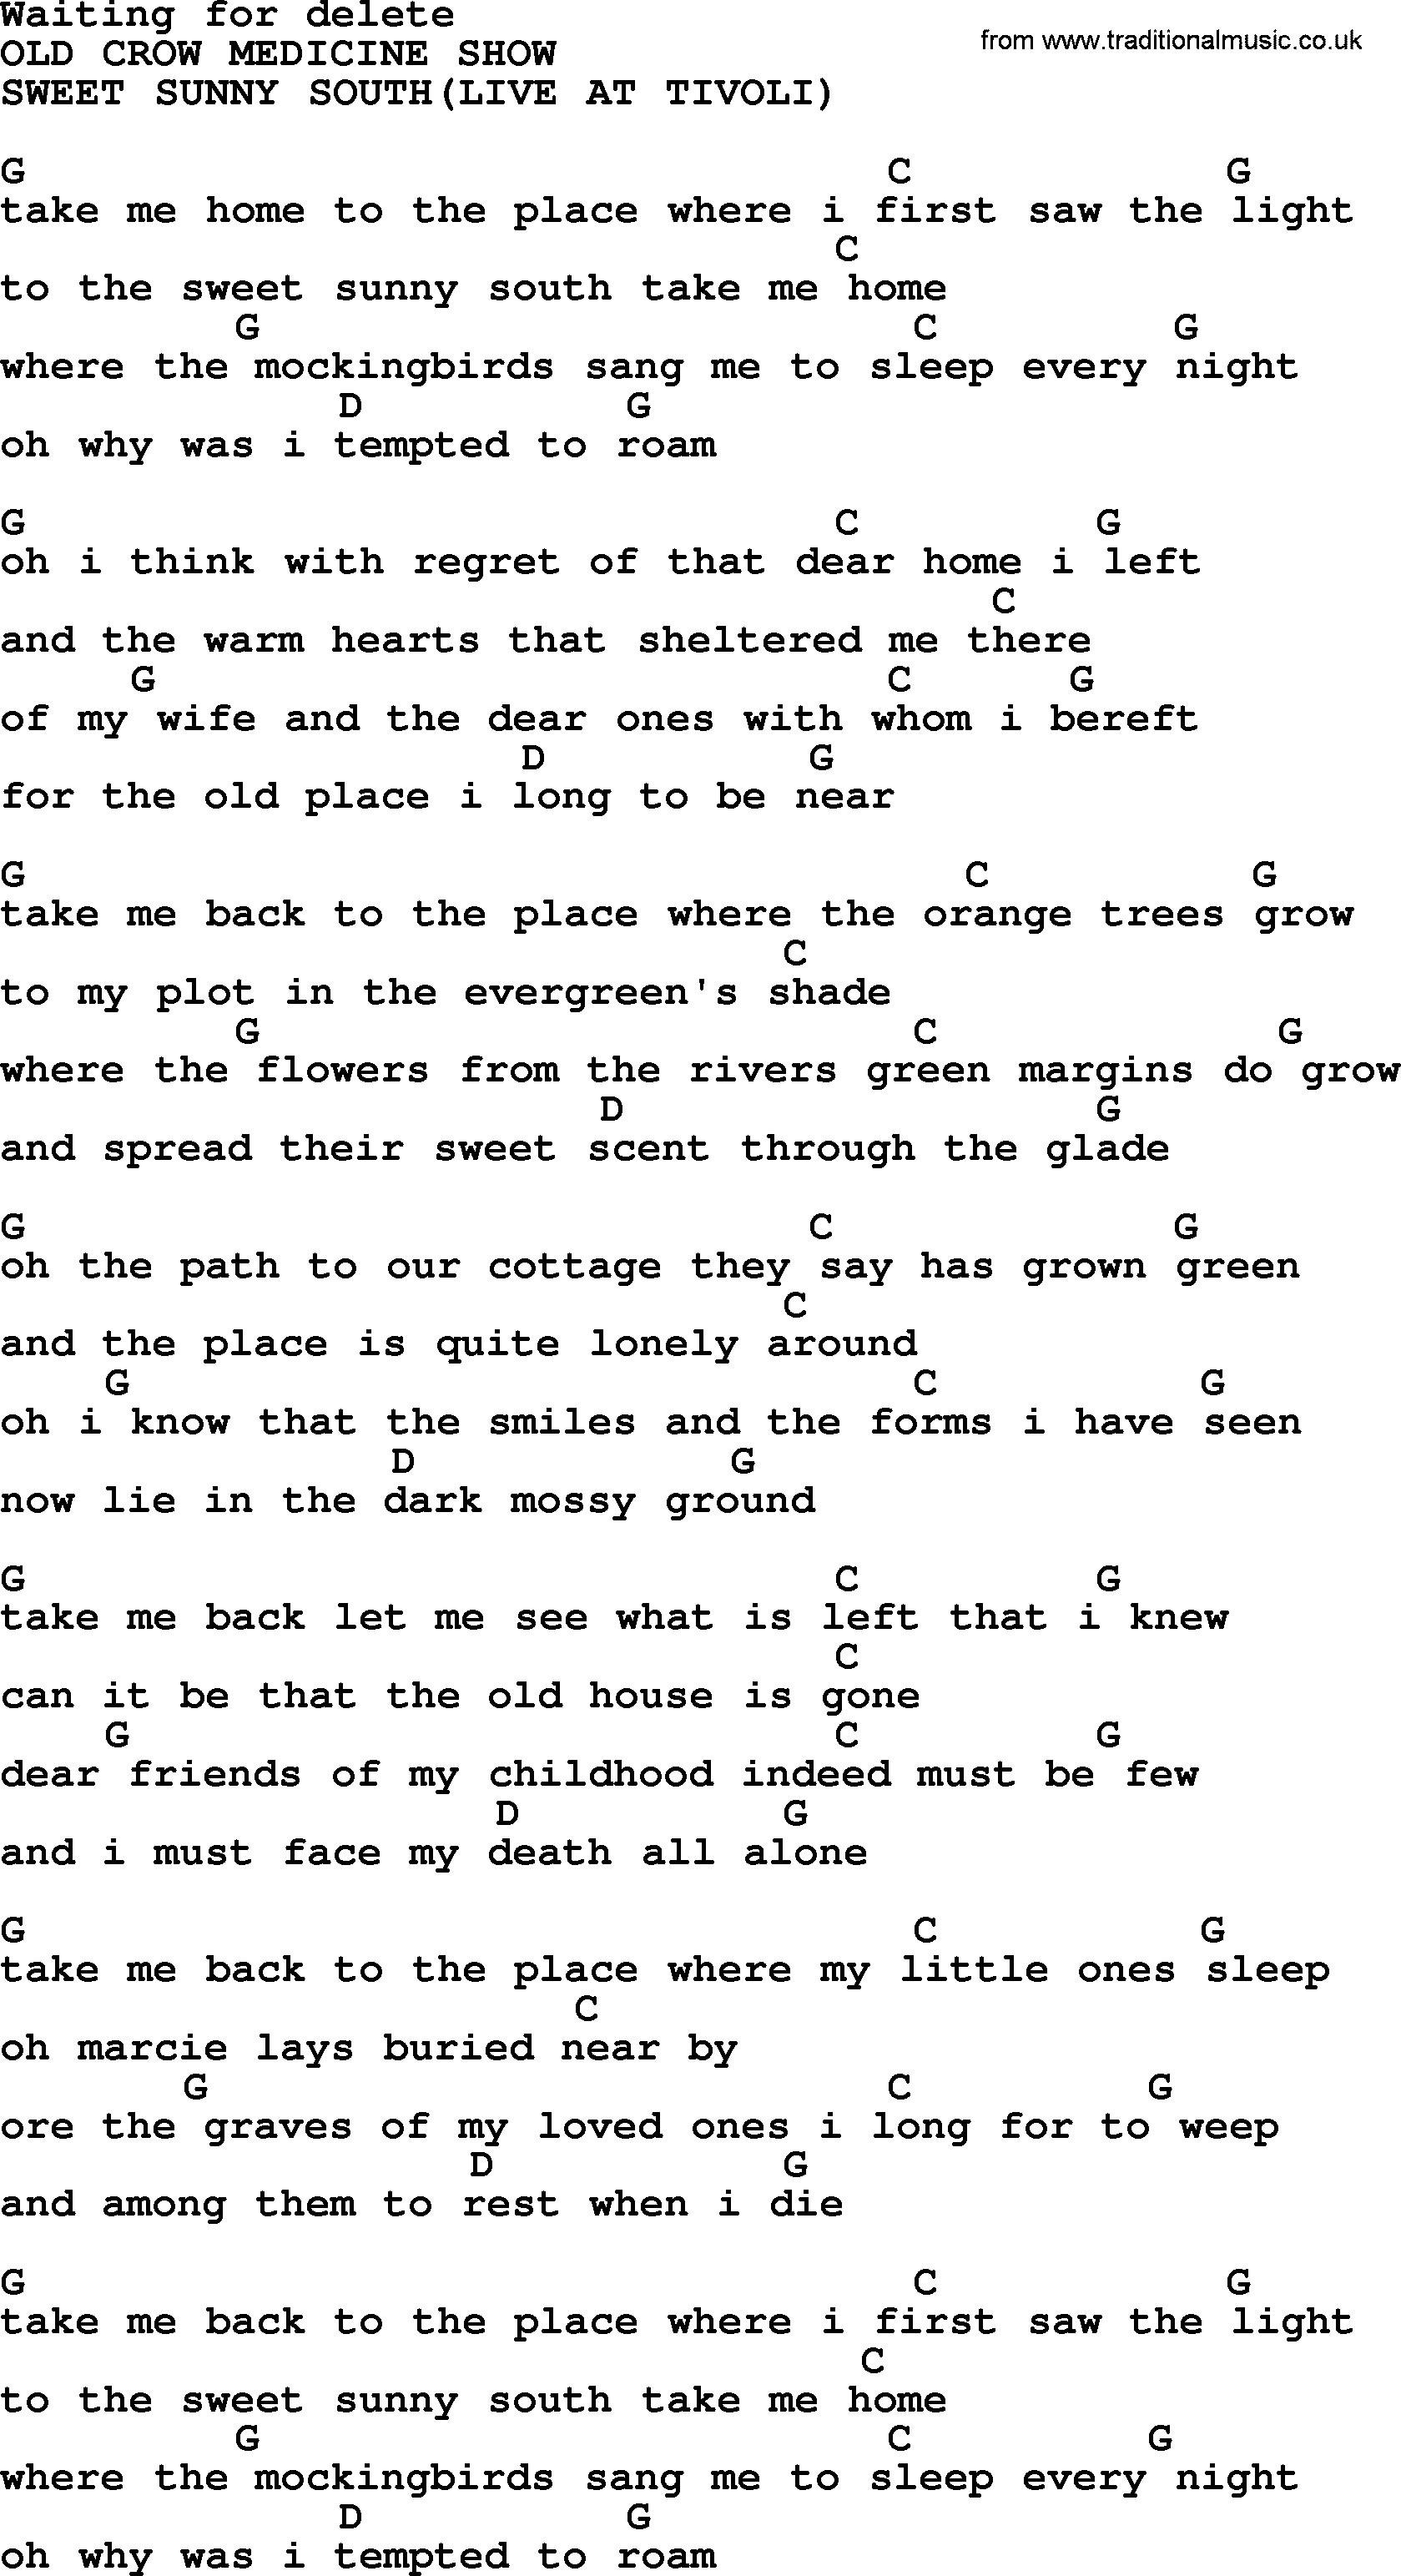 Bluegrass song: Waiting For Delete, lyrics and chords